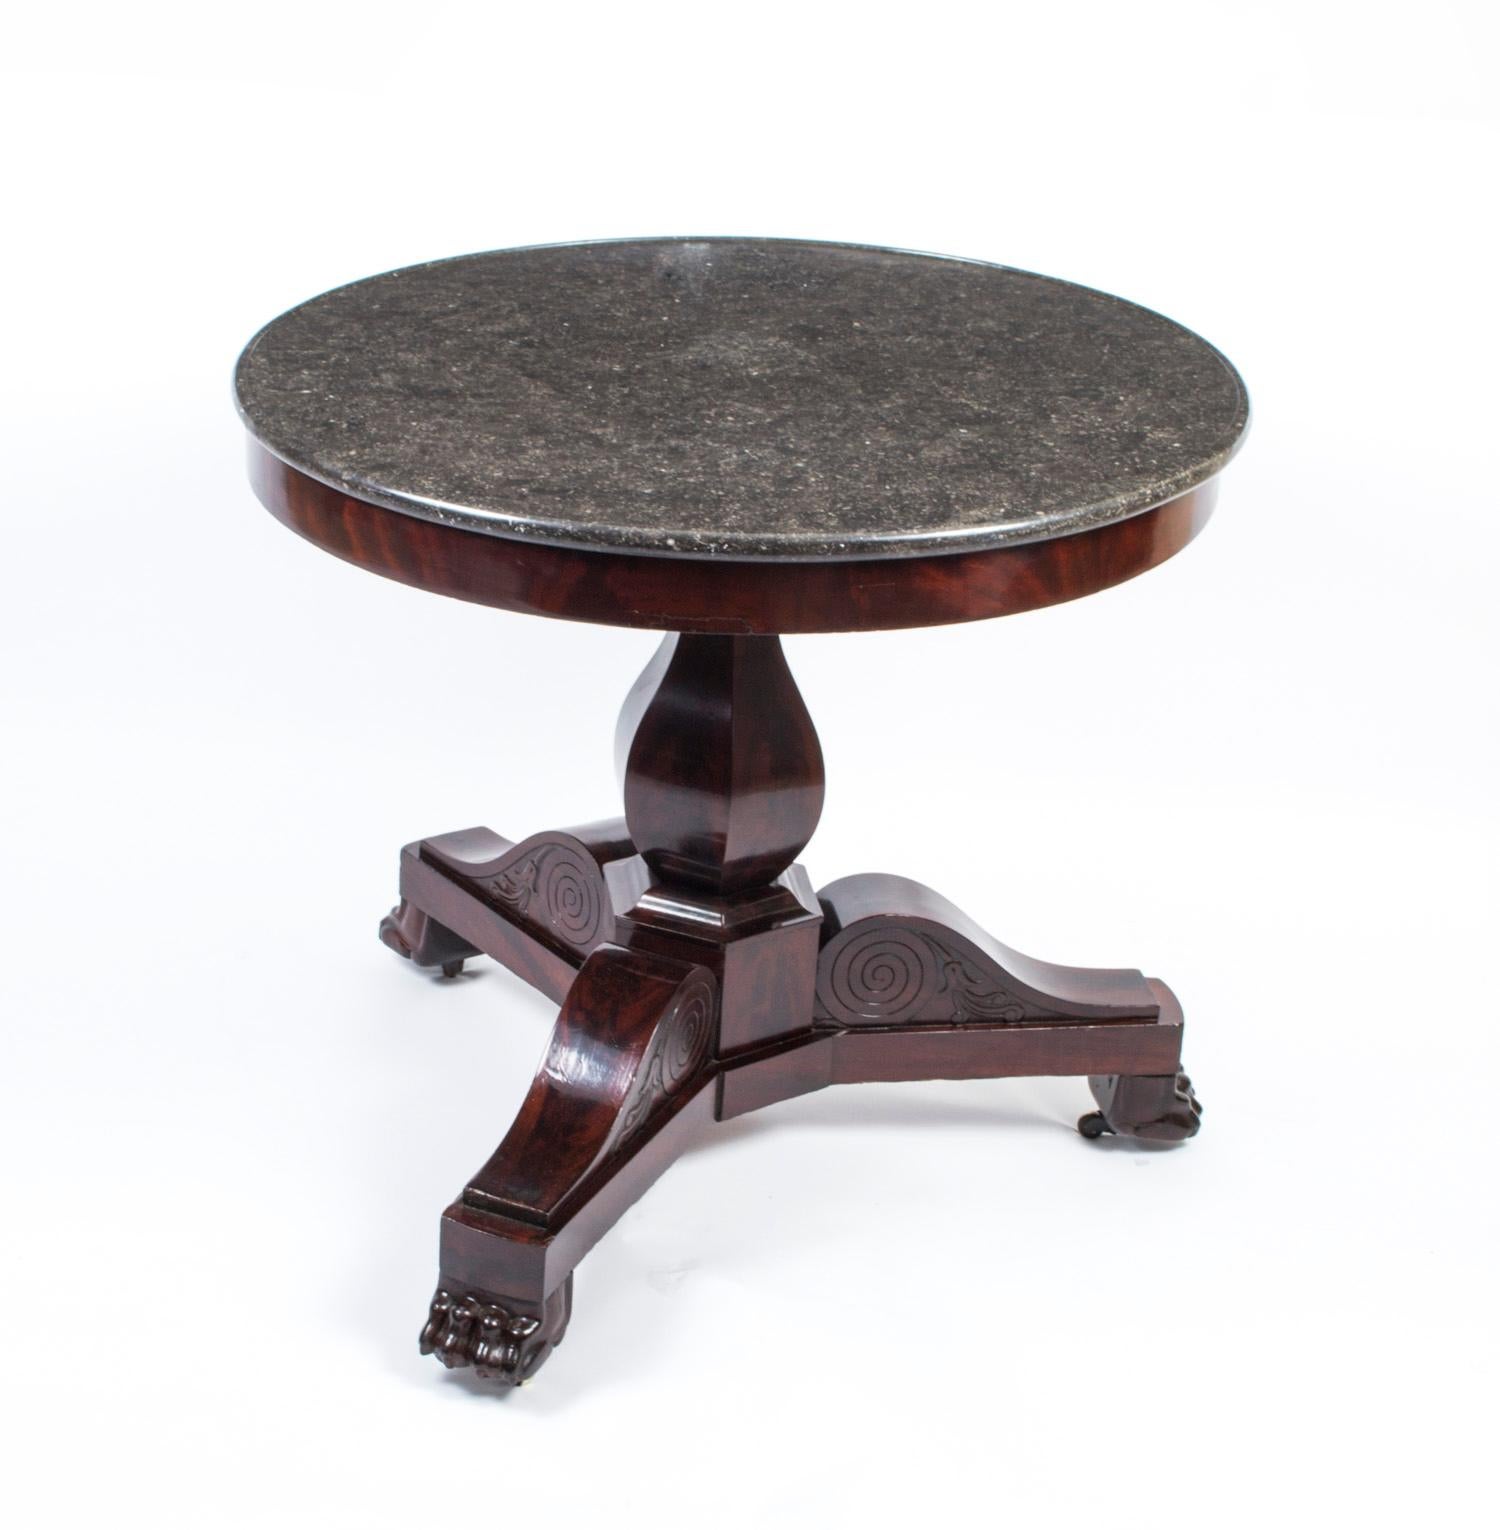 This is a handsome antique Charles X centre table, circa 1820 in date.

It is masterfully crafted in a deep rich flame mahogany with a central tulip column, three beautifully shaped scroll pedestal legs with lion's paw feet. 

It is surmounted with